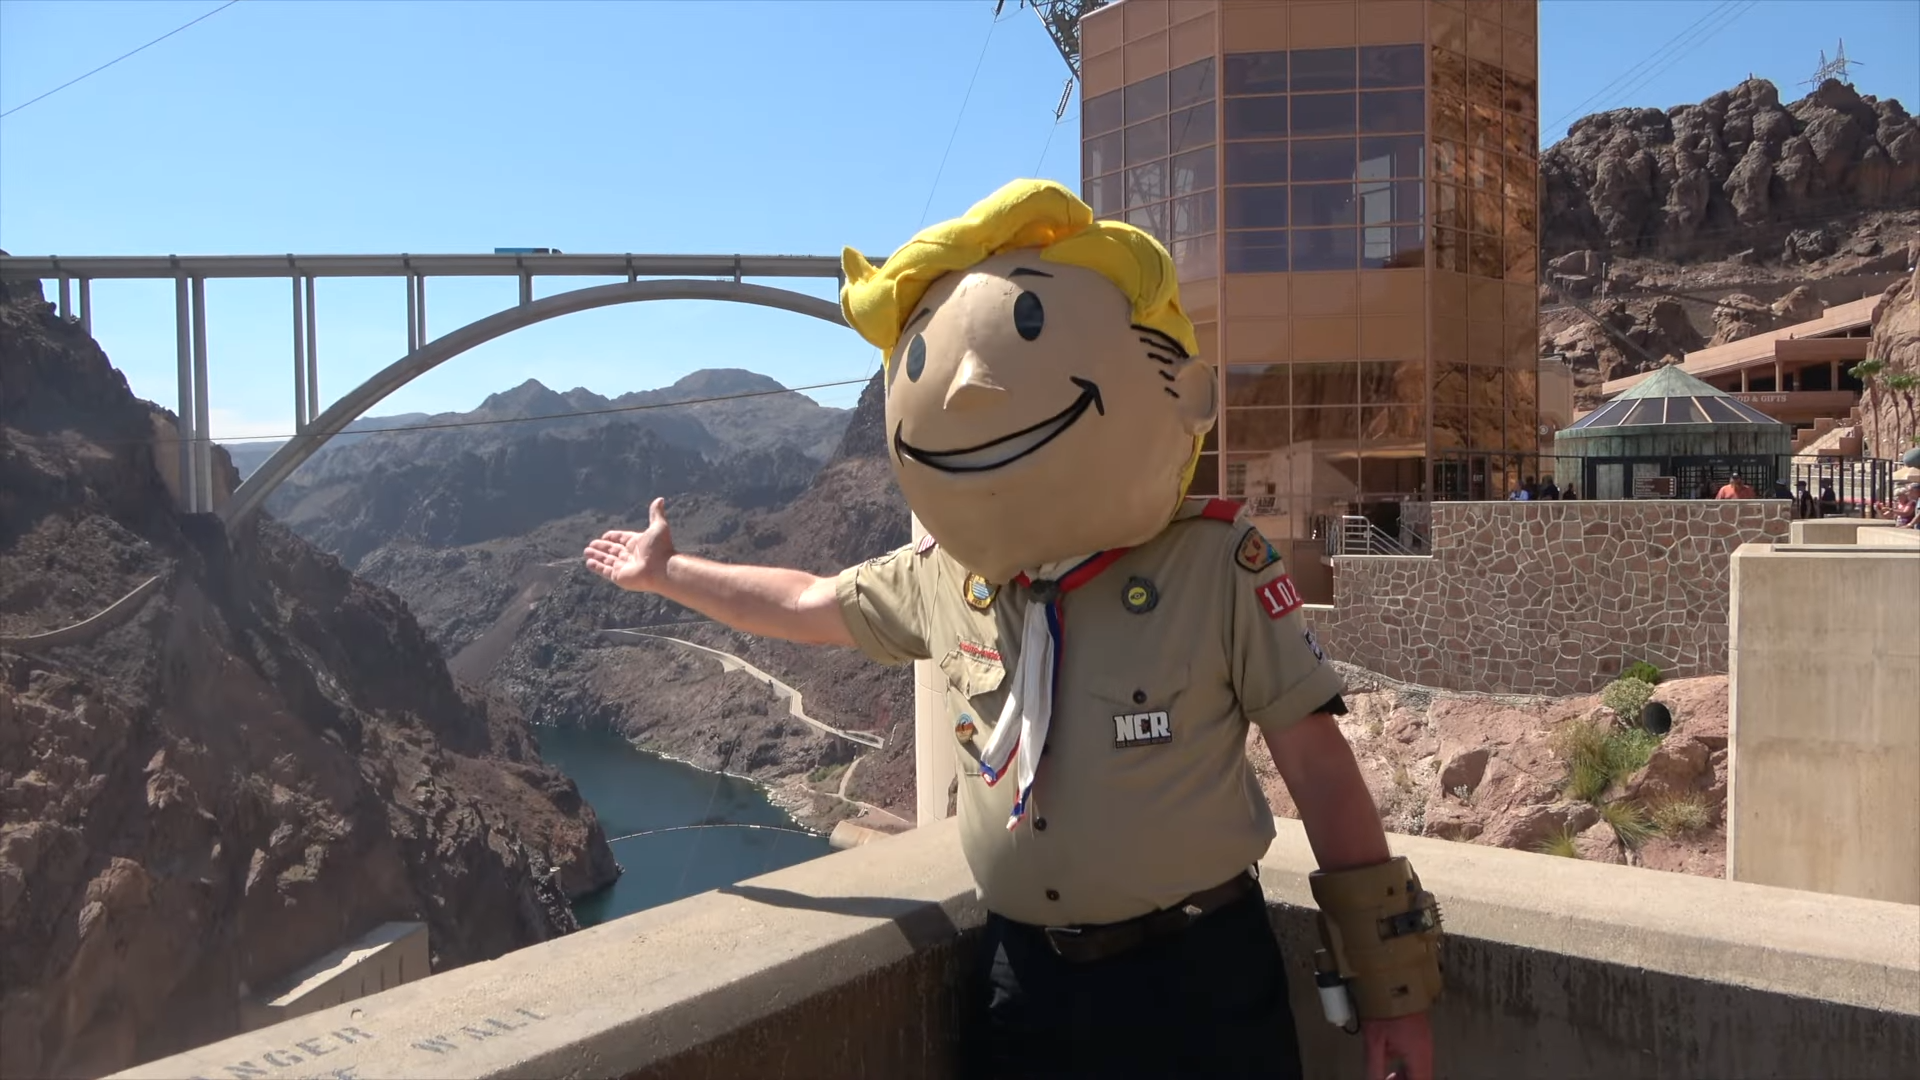 Meet the utterly sincere Fallout YouTuber who found his calling visiting the series' real-life locations wearing a Vault Boy head